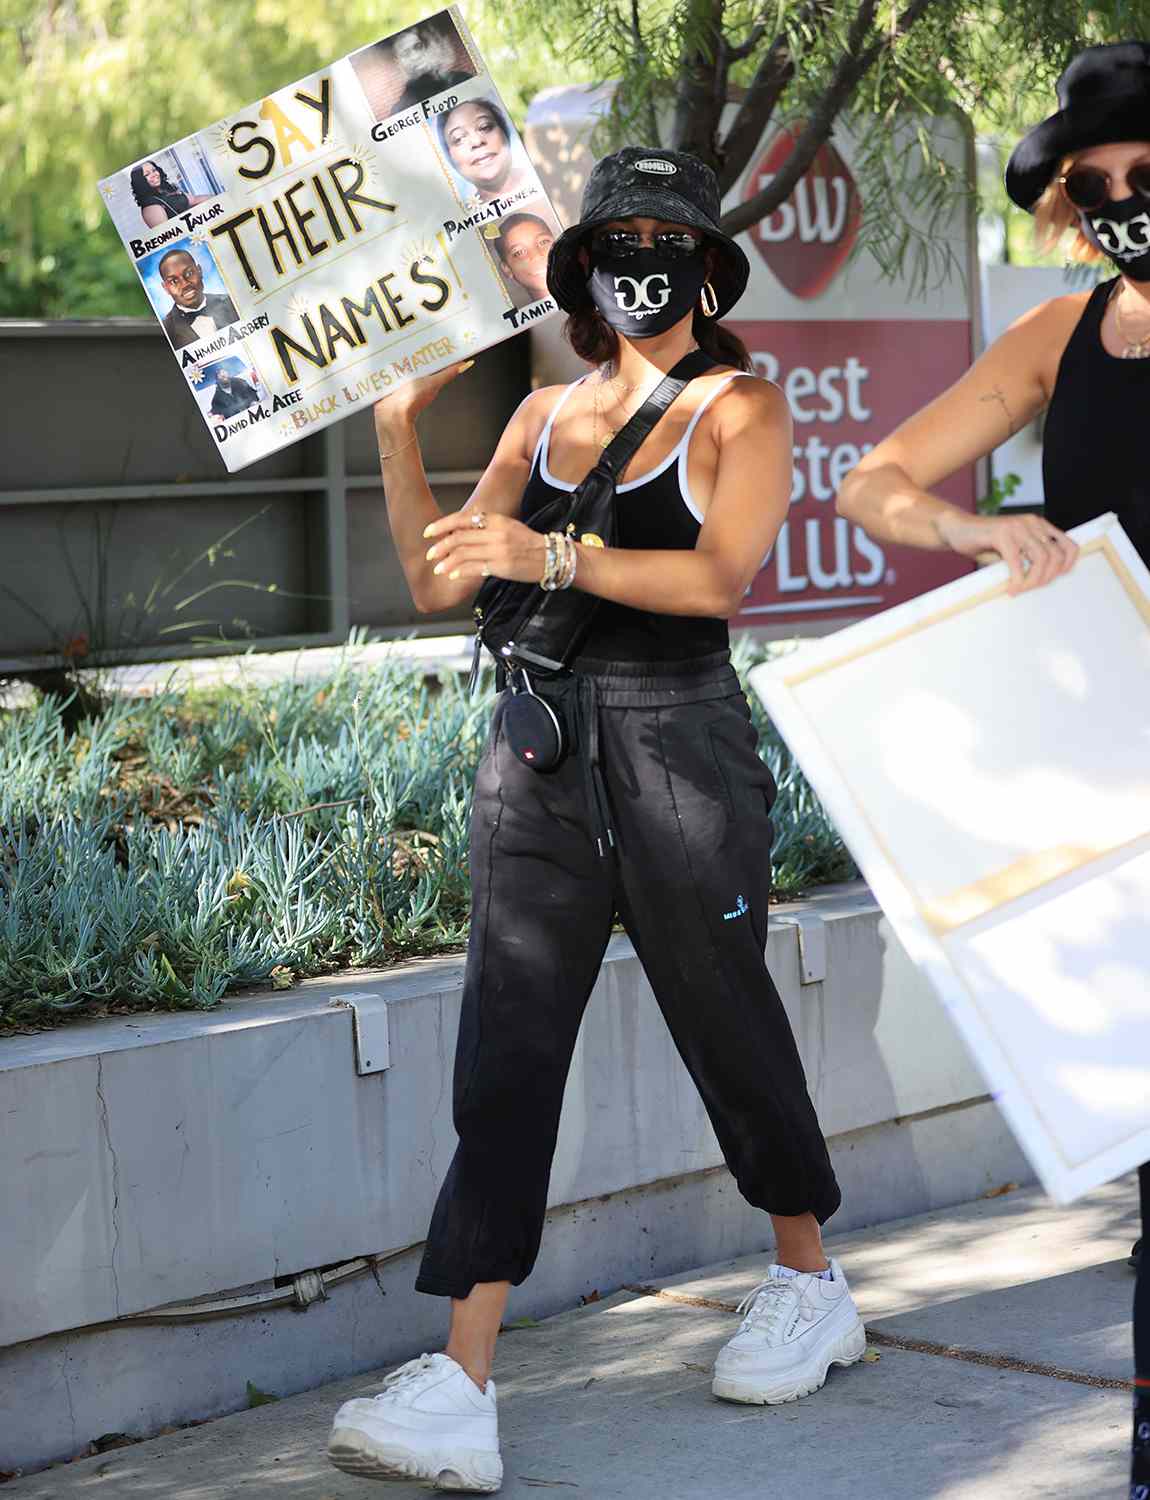 Vanessa Hudgens takes part in the BLM protests in Hollywood, CA